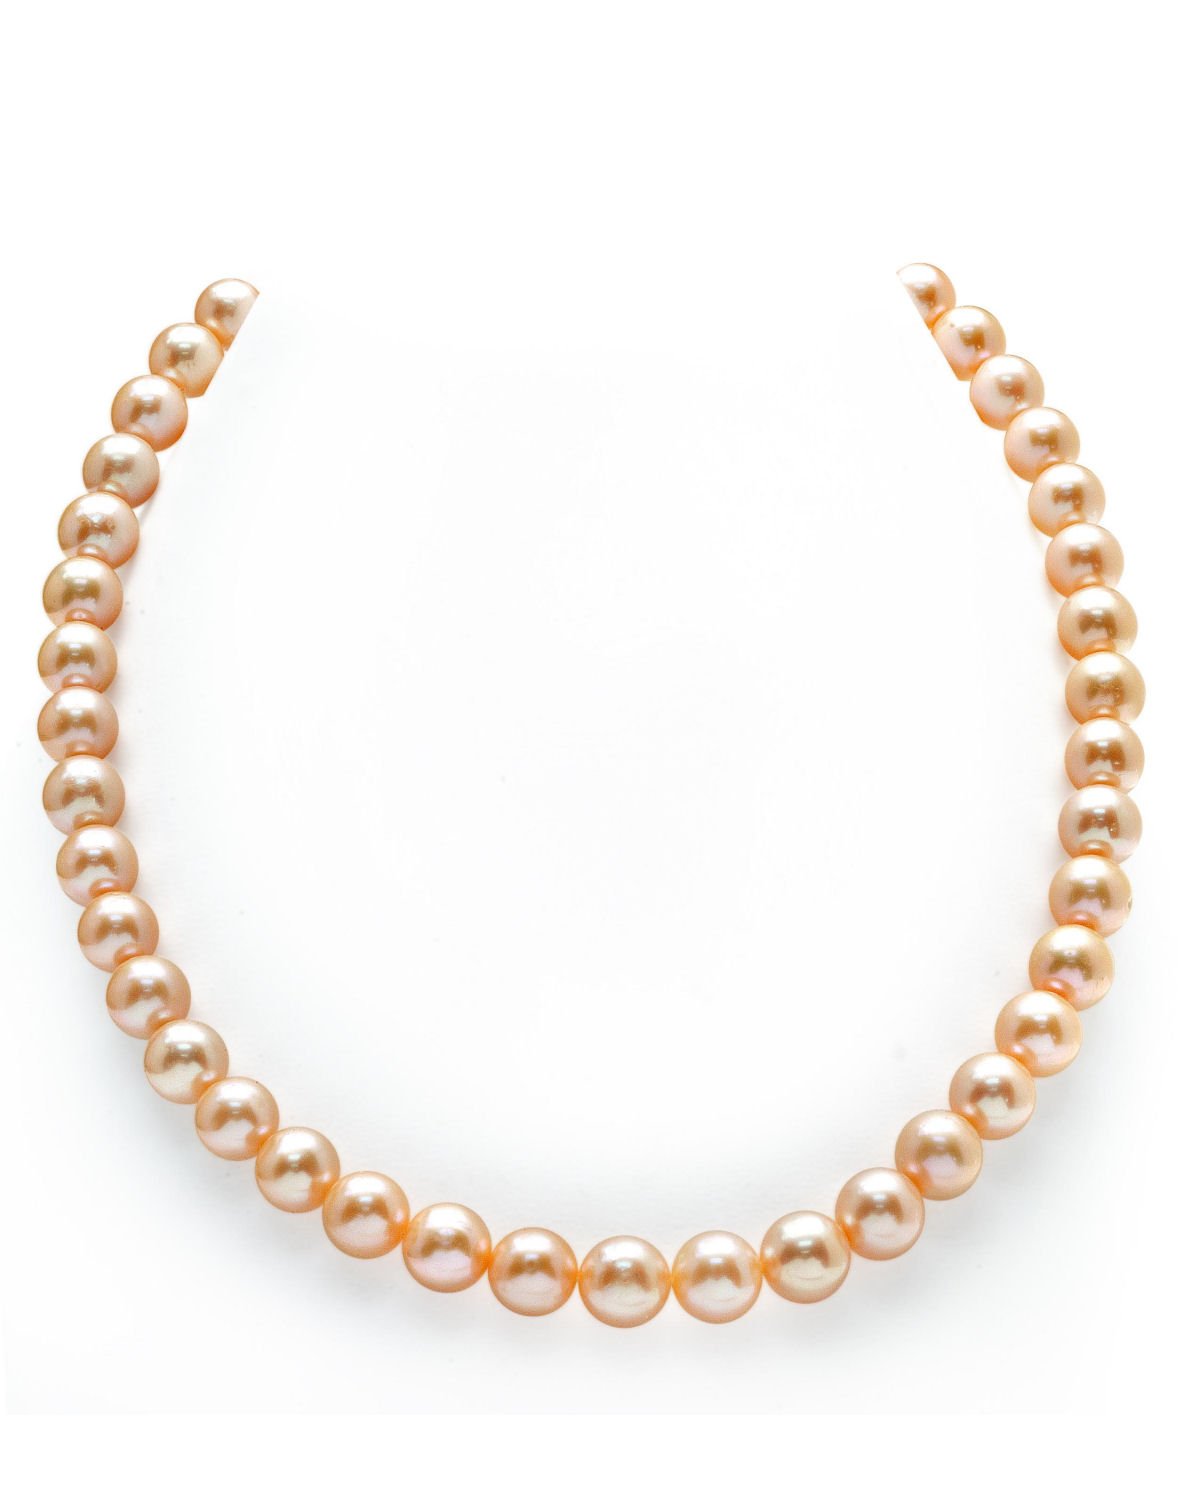 8.5-9.5mm Peach Freshwater Pearl Necklace - AAA Quality